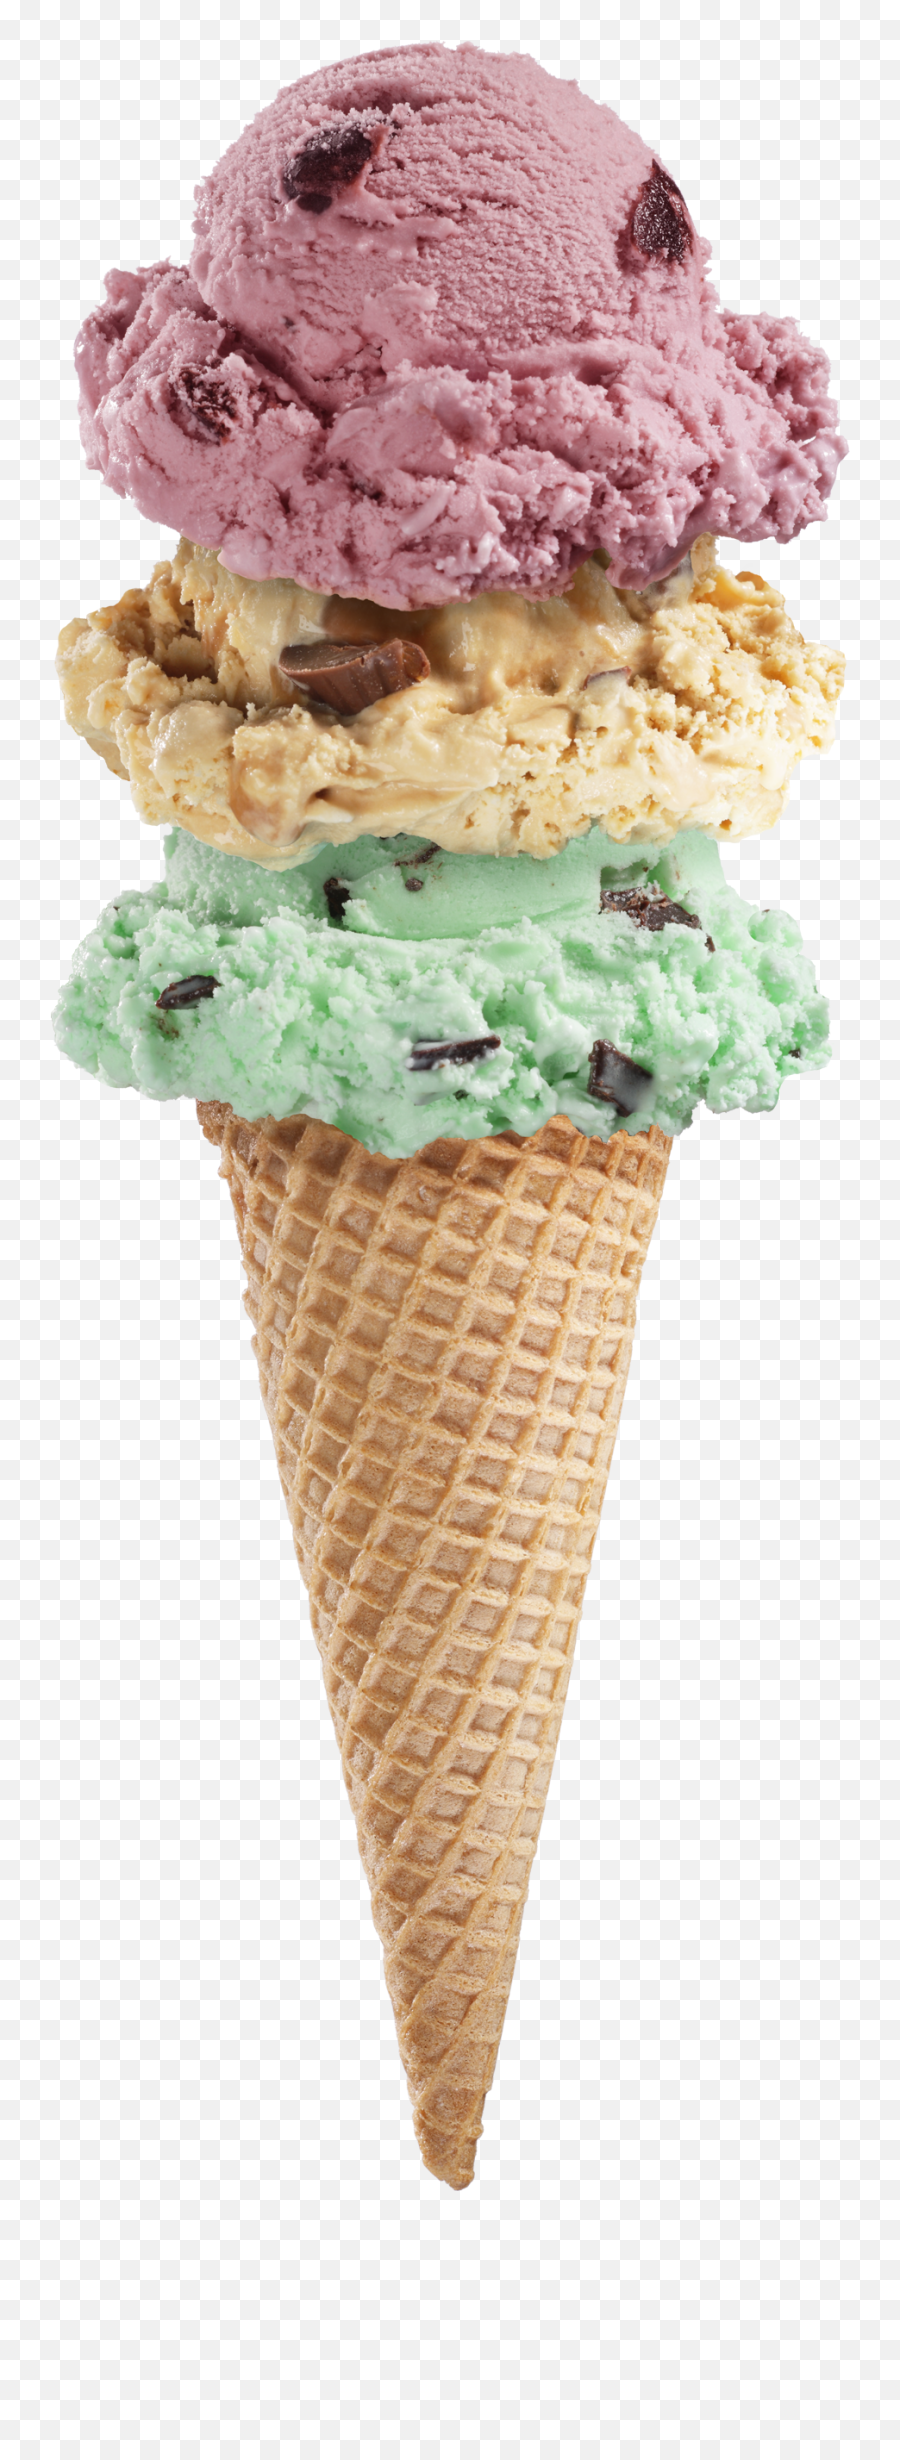 Icecream Hd Png Transparent Hdpng Images Pluspng - Png Ice Cream Cone,Ice Cream Transparent Background